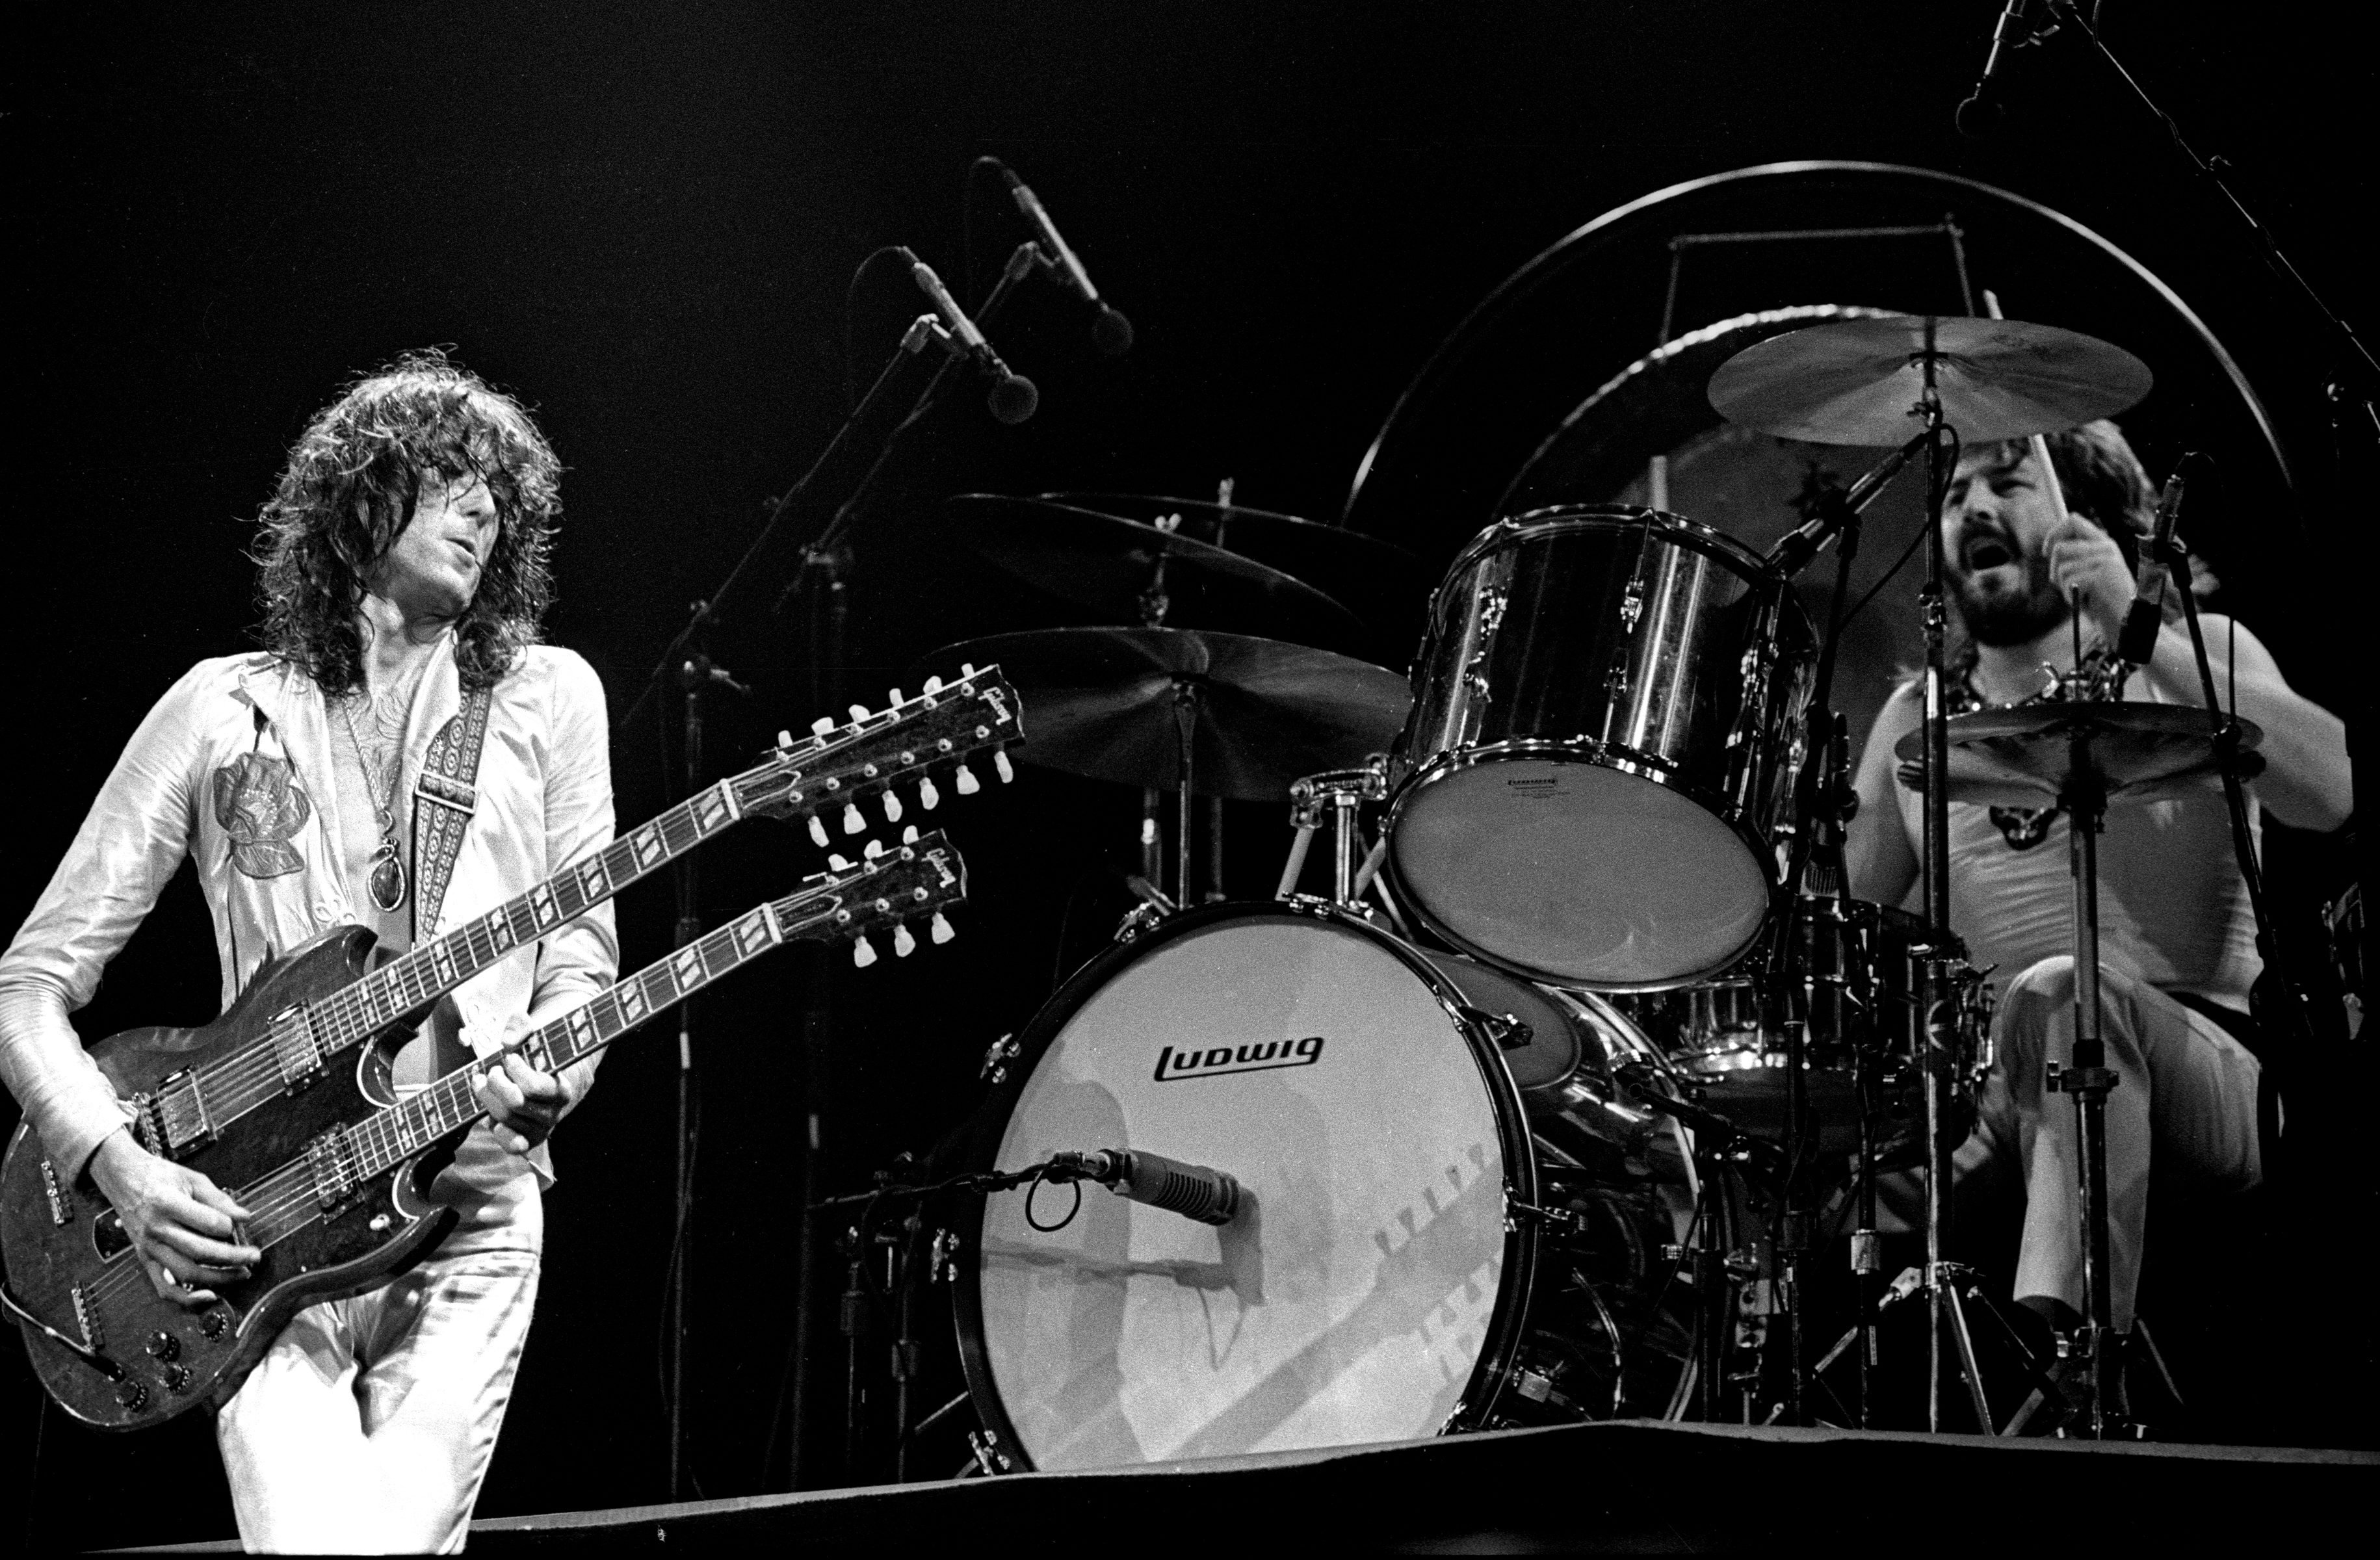 Led Zeppelin performs live at Madison Square Garden (Jimmy Page and John Bonham)